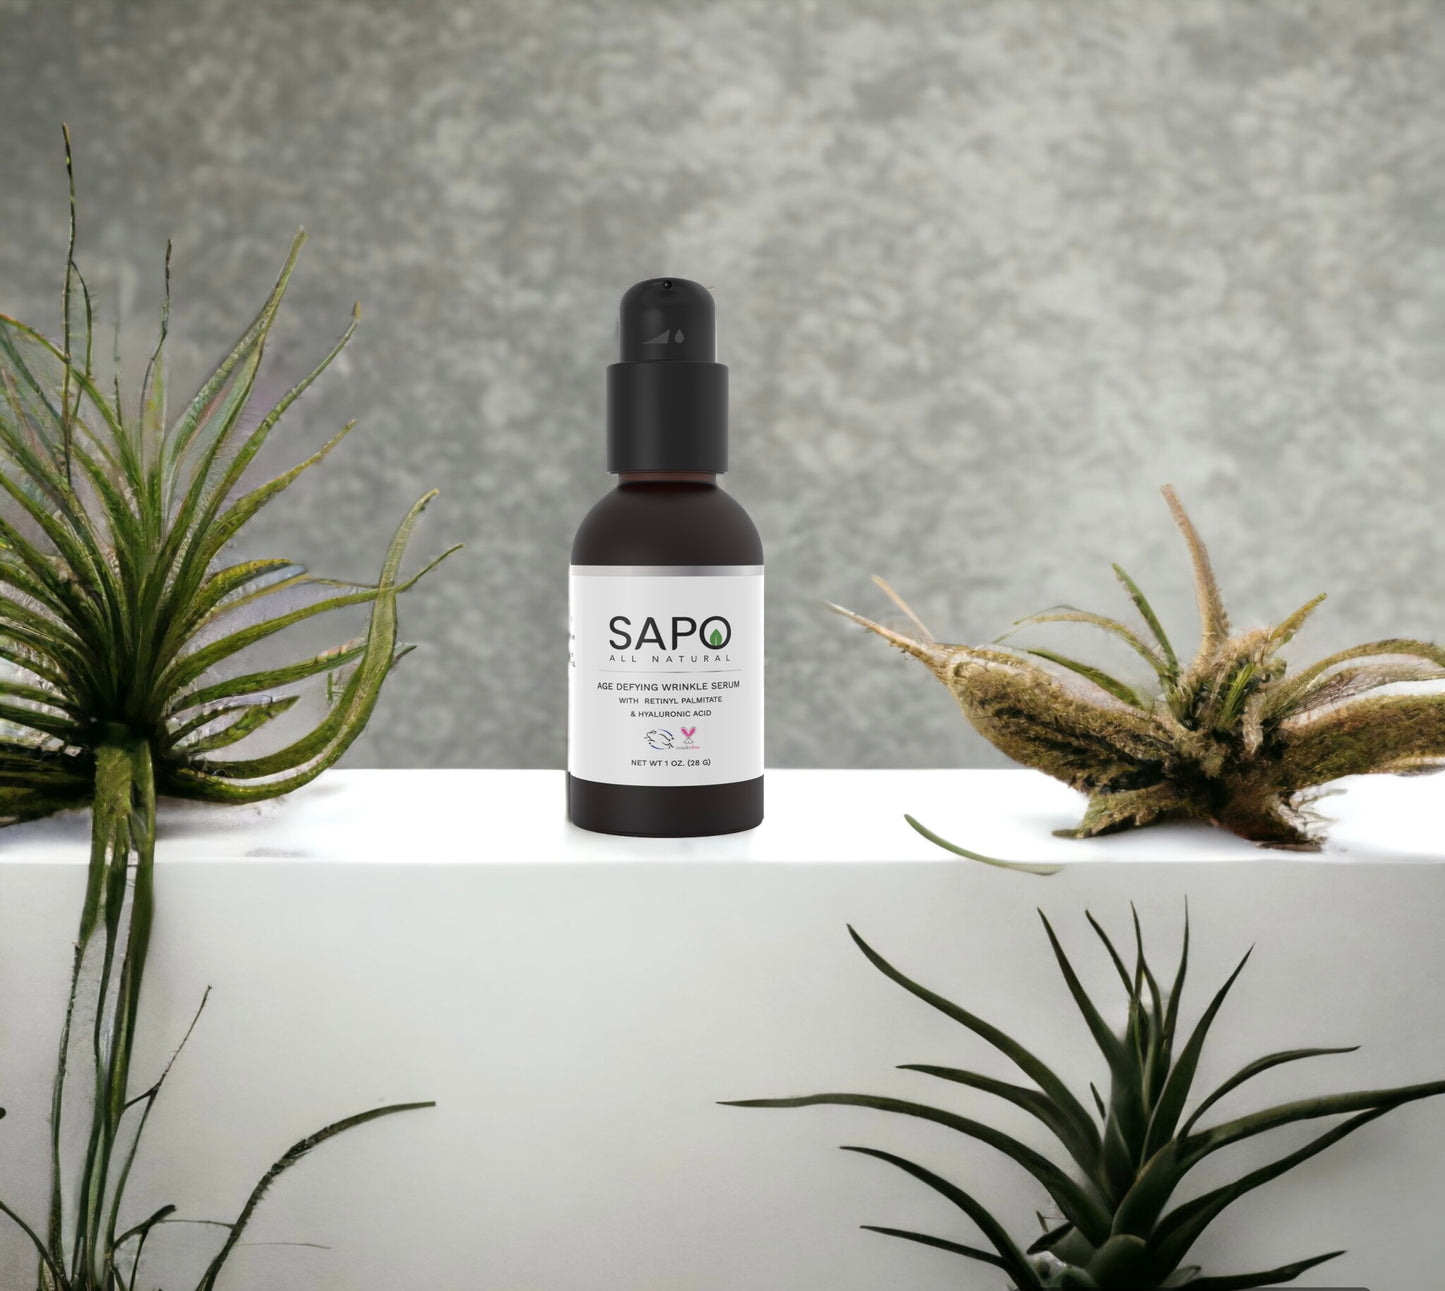 Sapo All Natural Wrinkle Serum with Hyaluronic Acid, Retinol and